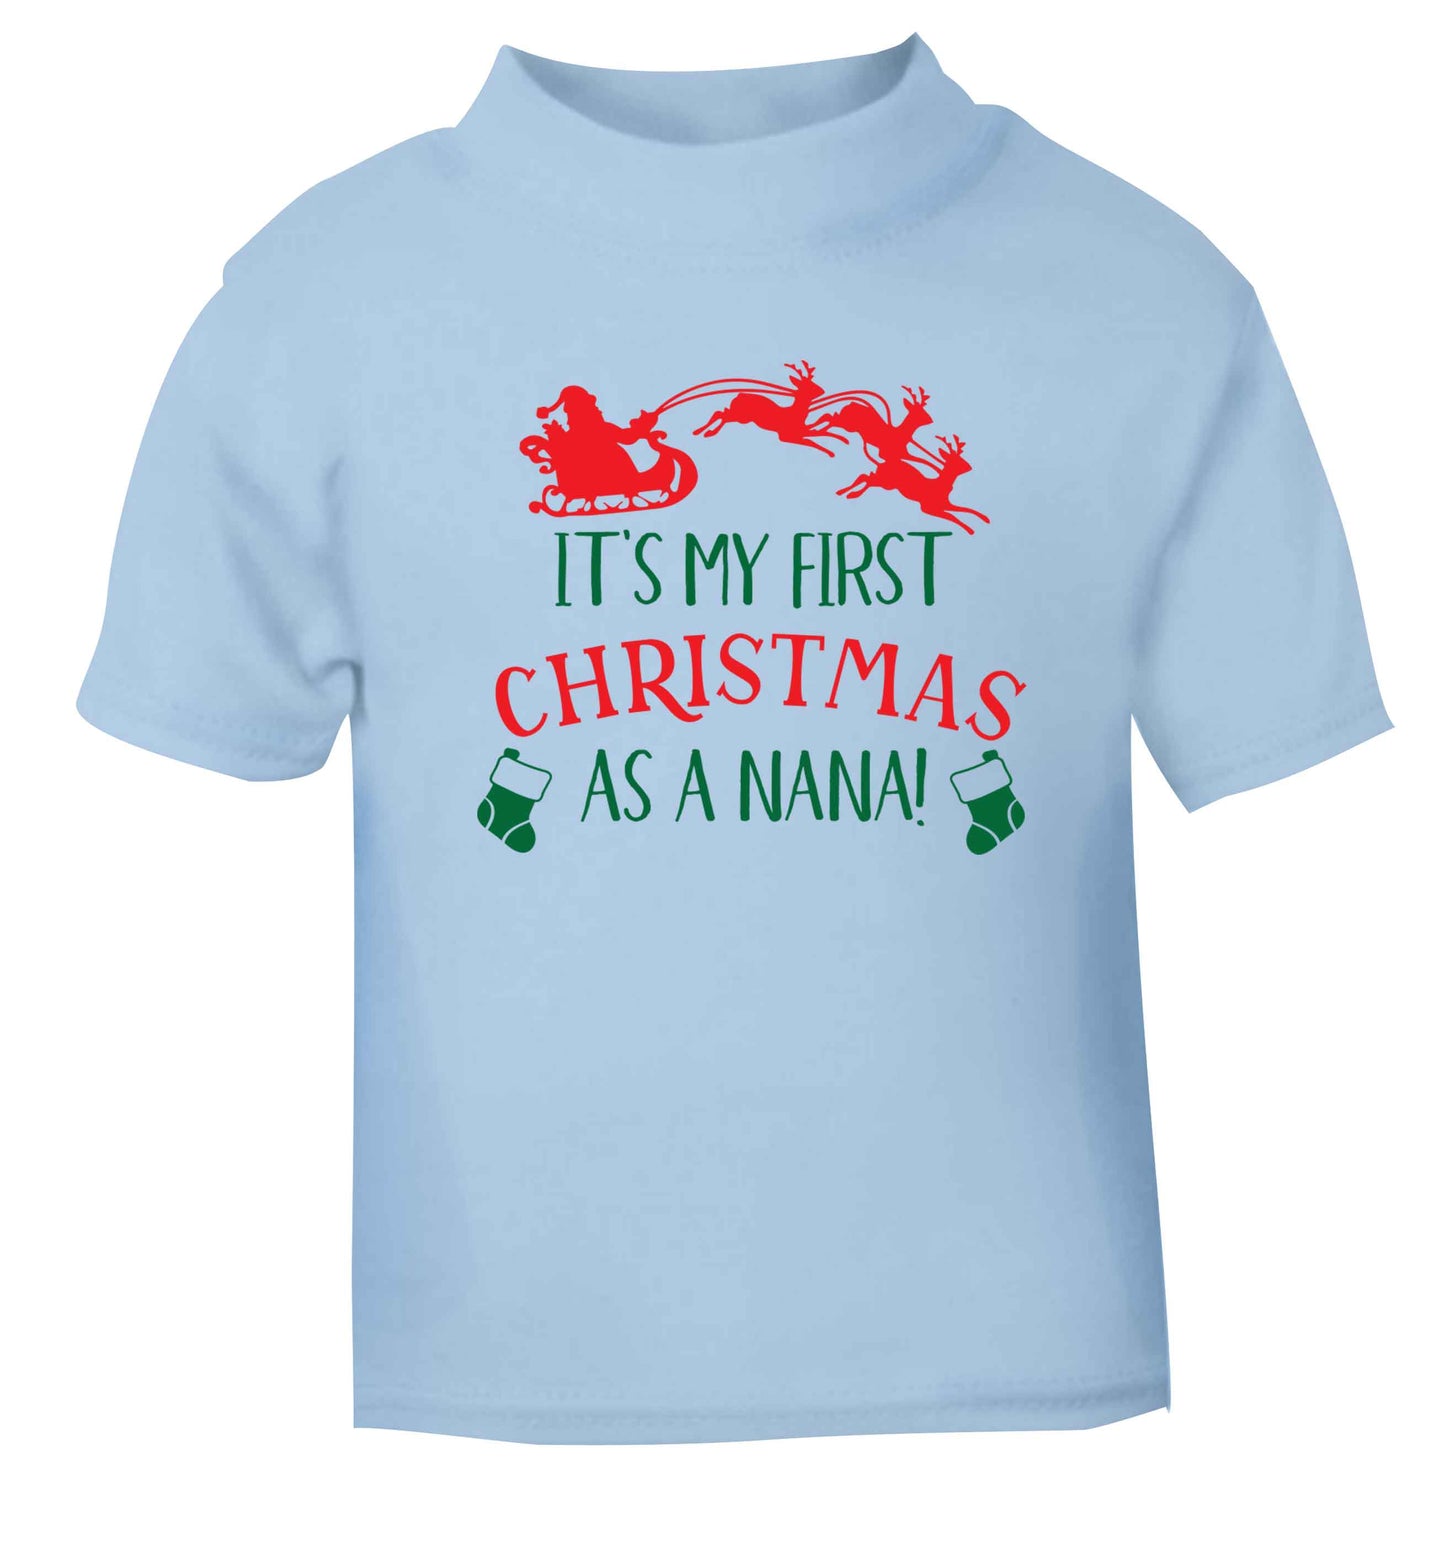 It's my first Christmas as a nana light blue Baby Toddler Tshirt 2 Years